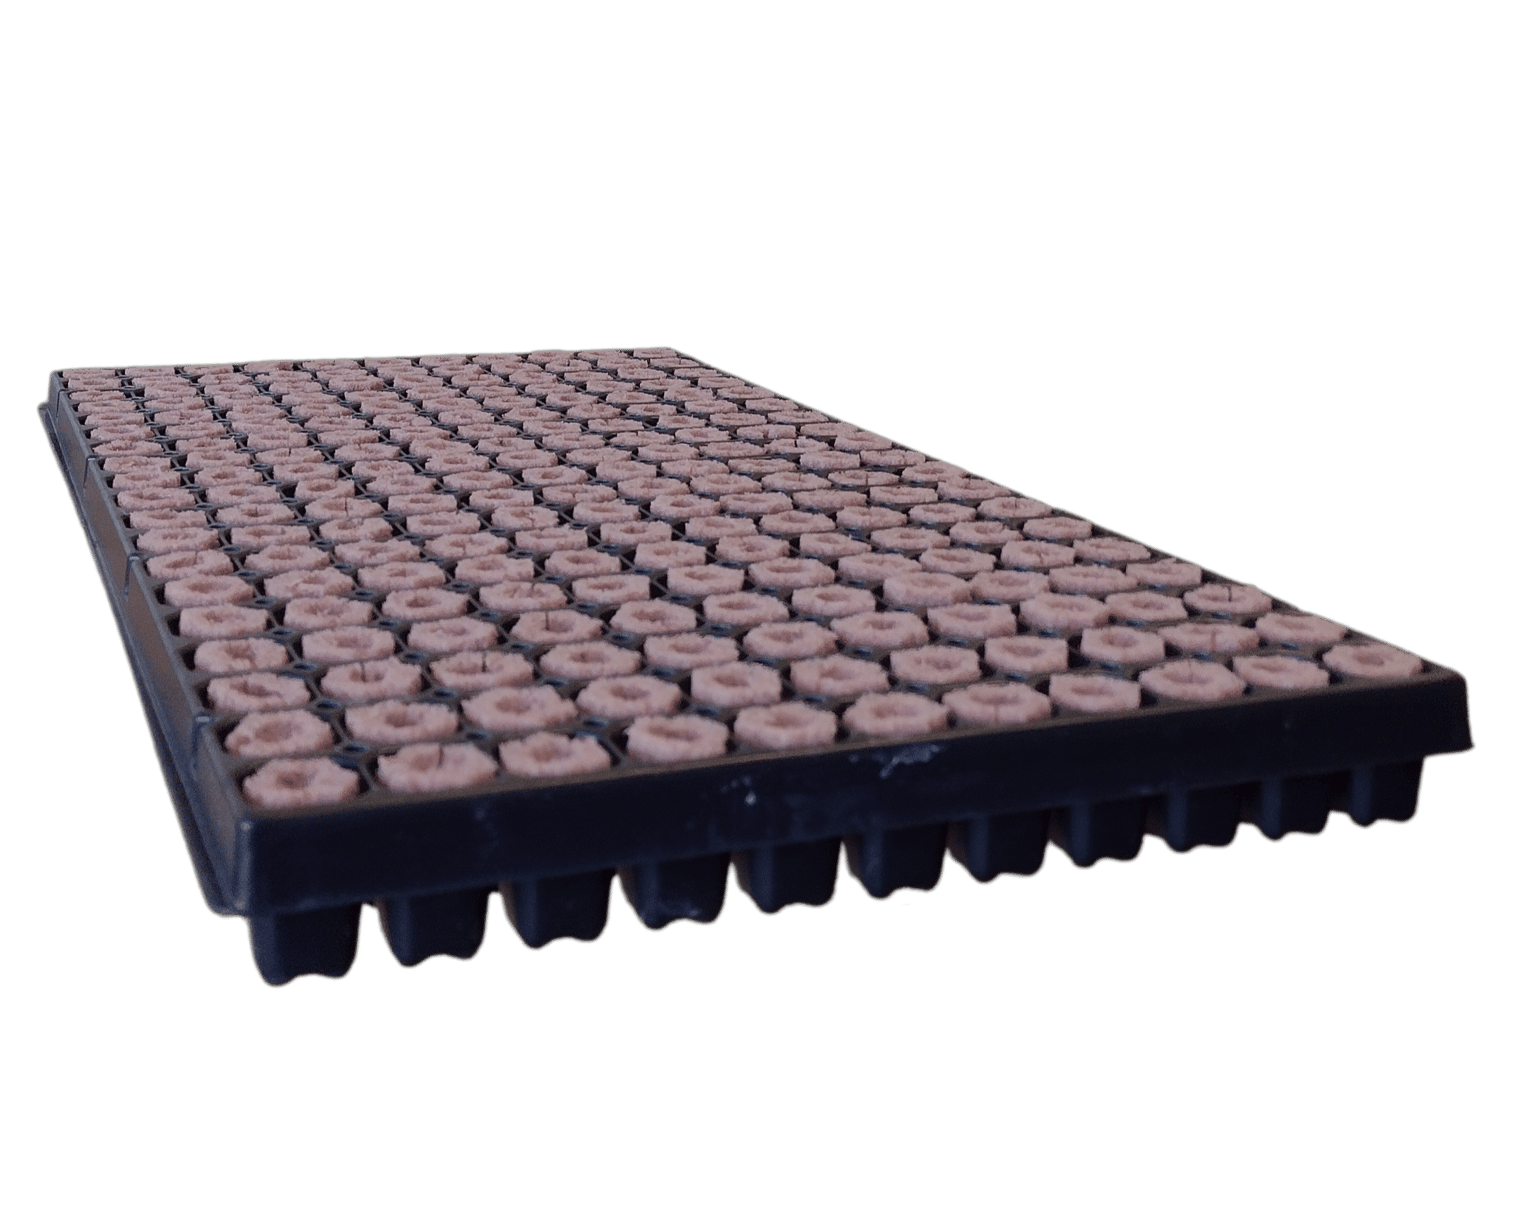 1 seedling tray for growfoam plugs with 2135-01 plugs.